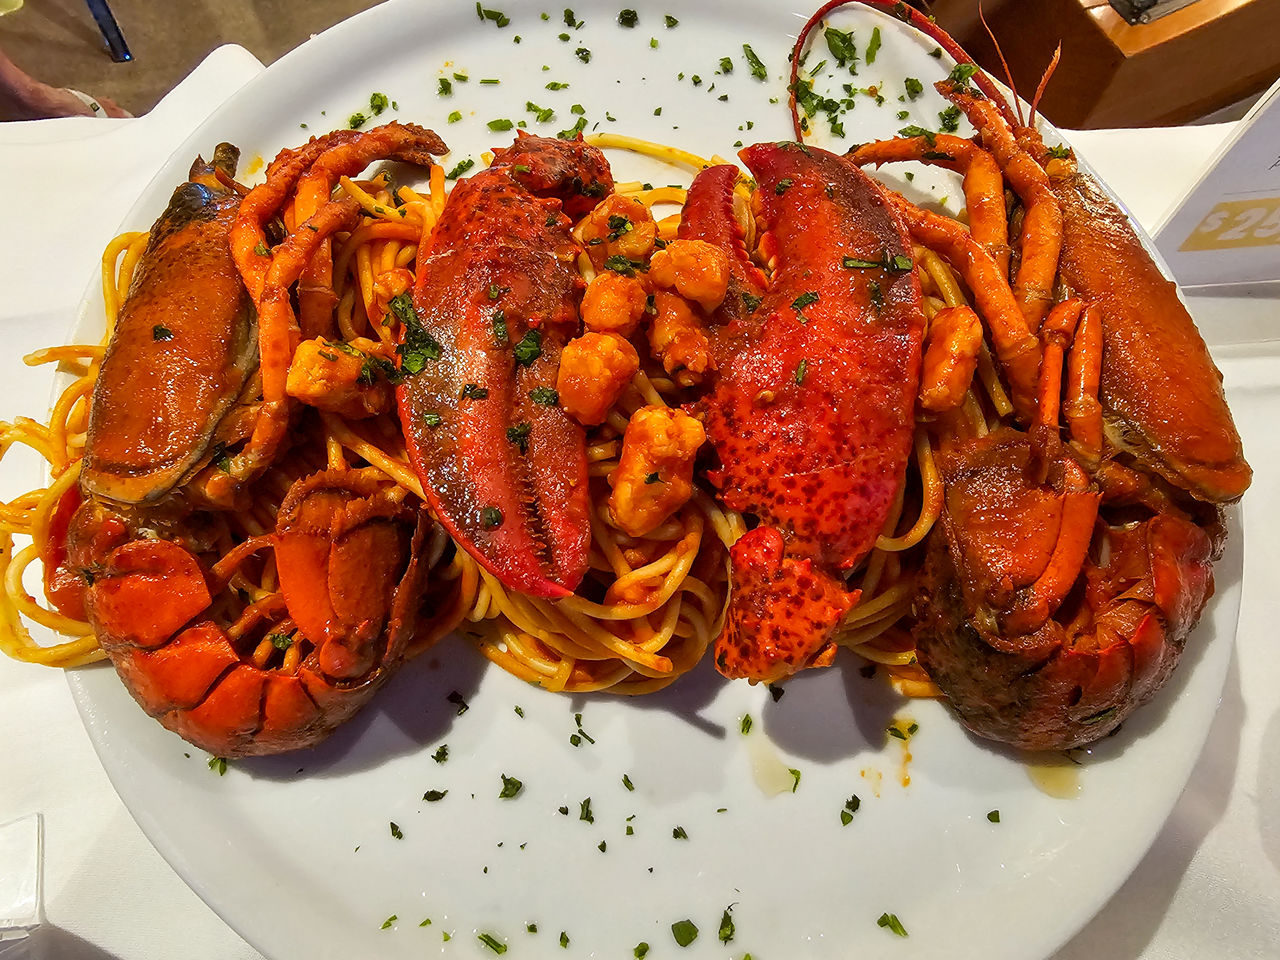 food, food and drink, seafood, plate, crustacean, freshness, healthy eating, animal, meal, seafood boil, table, no people, wellbeing, high angle view, dish, restaurant, indoors, lobster, dinner, close-up, serving size, gourmet, cooked, crab, shrimp